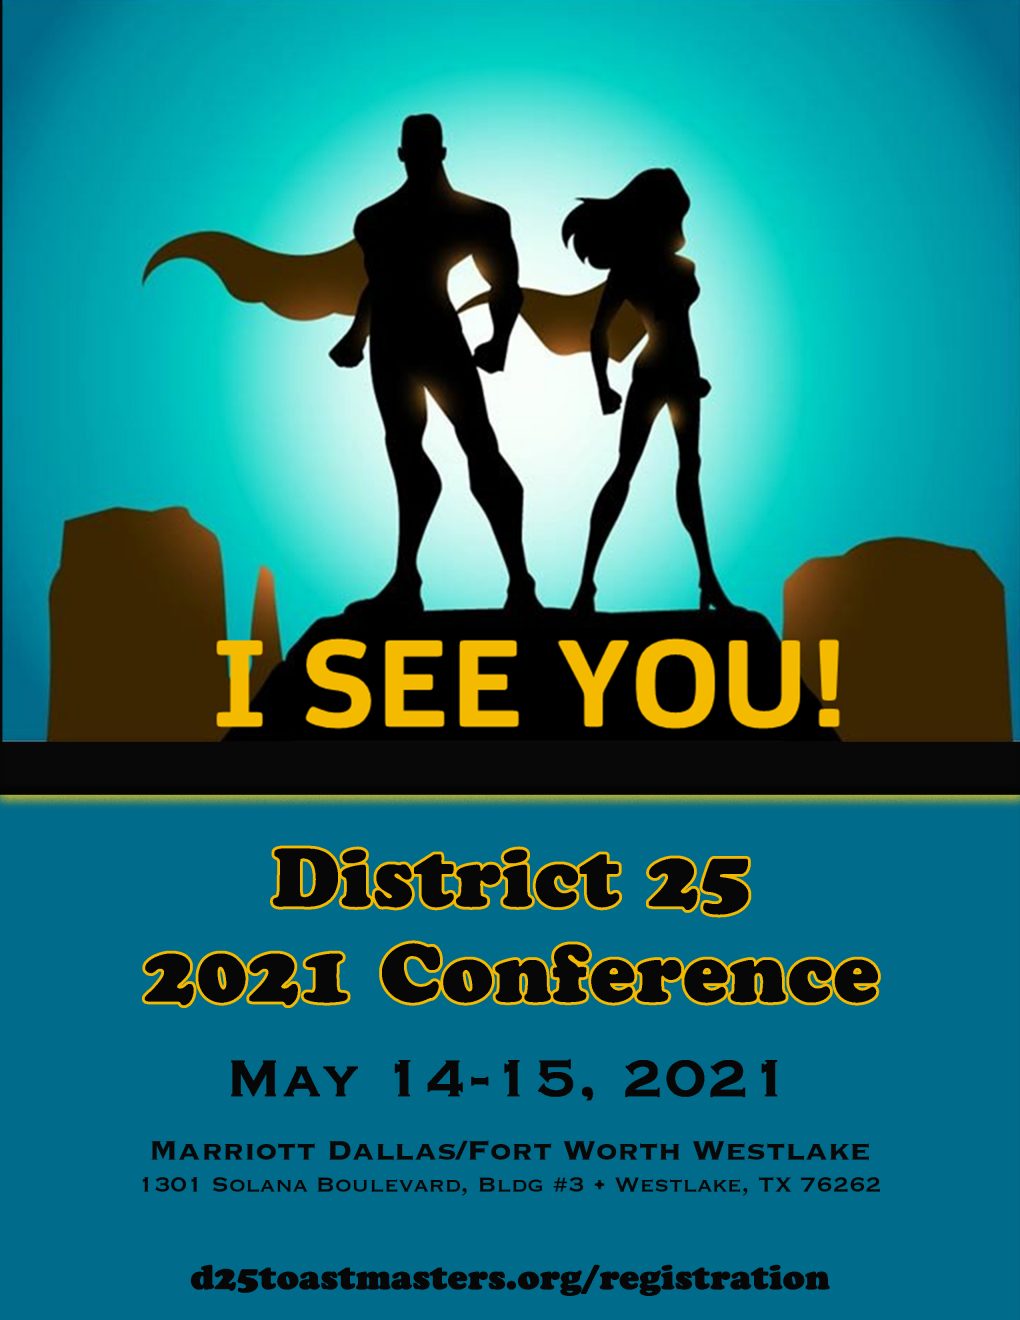 2021 “Super Powers” Annual Conference – May 14-15, 2021